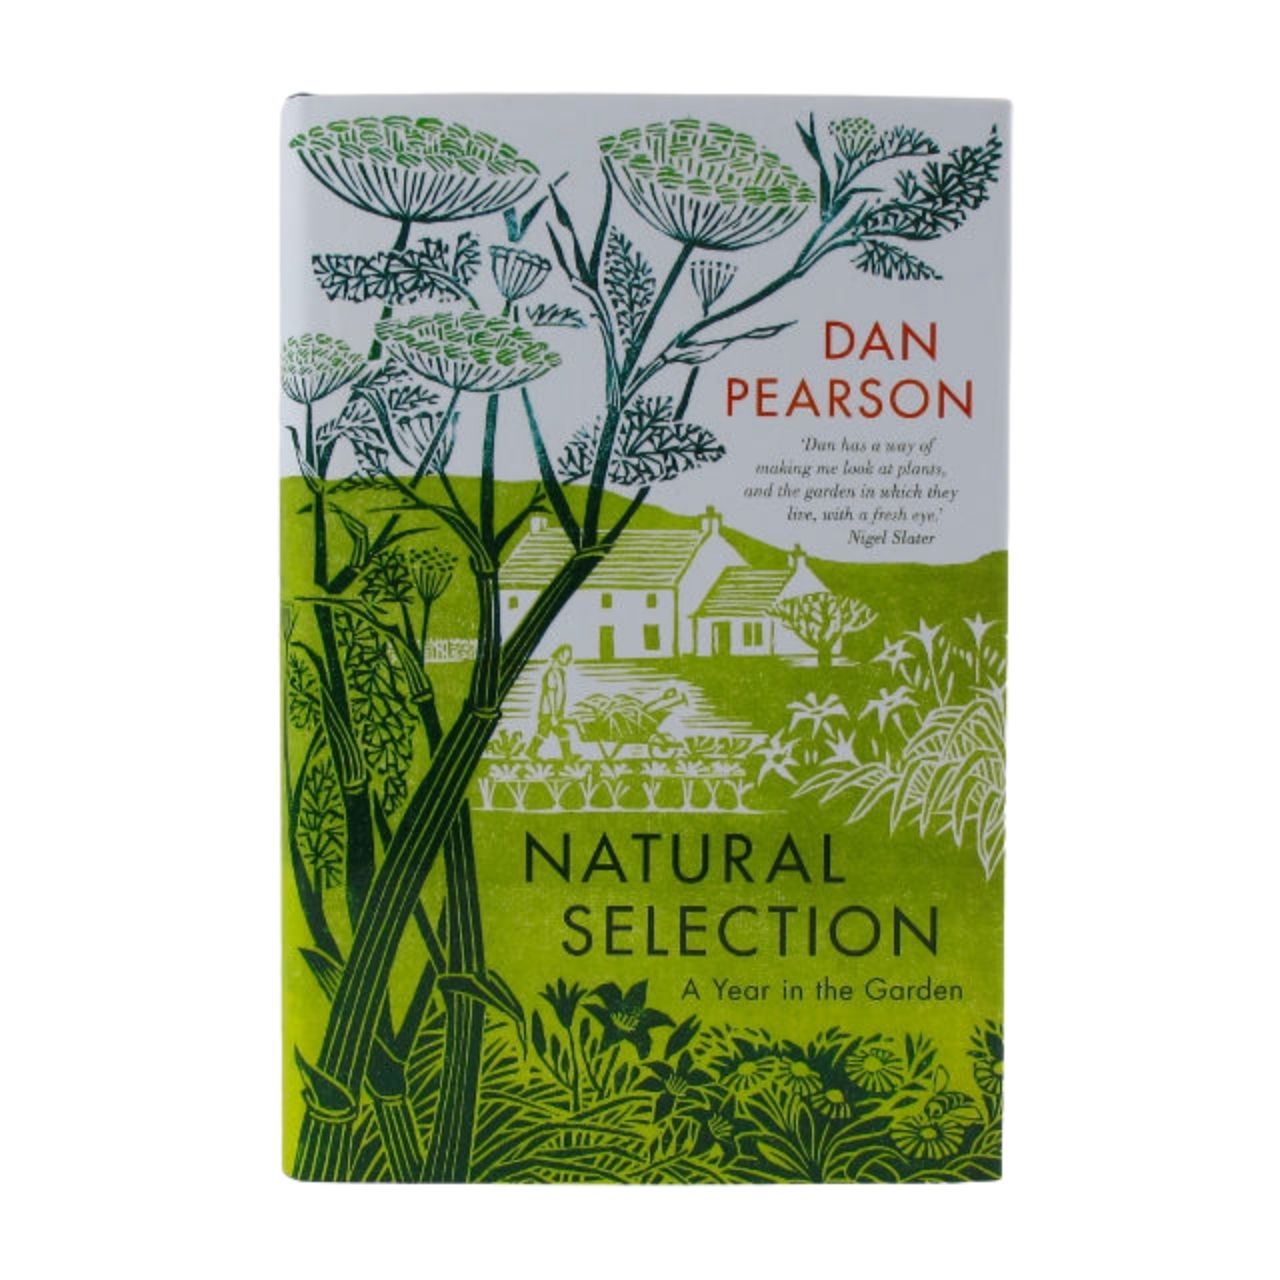 Faber & Faber Natural Selection: A Year in the Garden Book - Dan Pearson